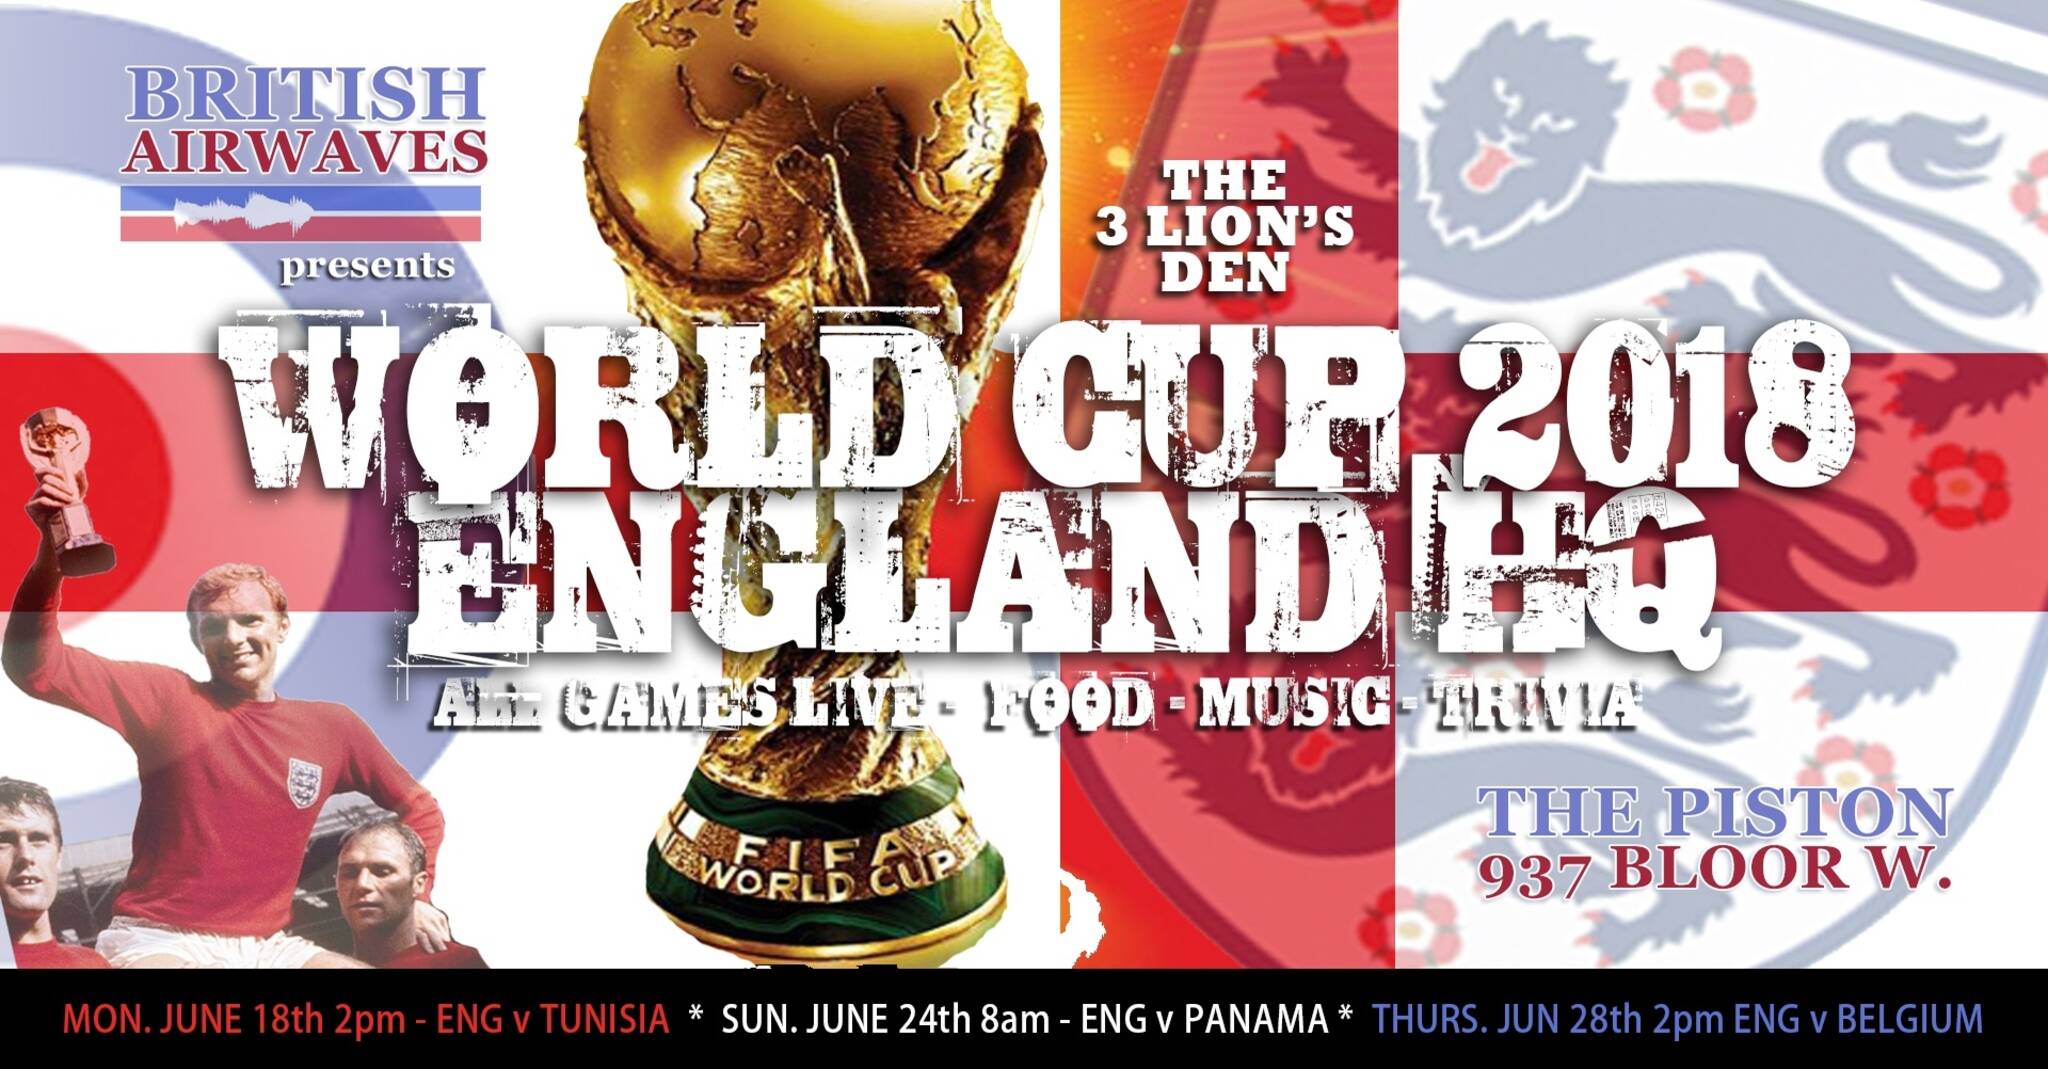 The 3 Lion's Den - England World Cup HQ Toronto